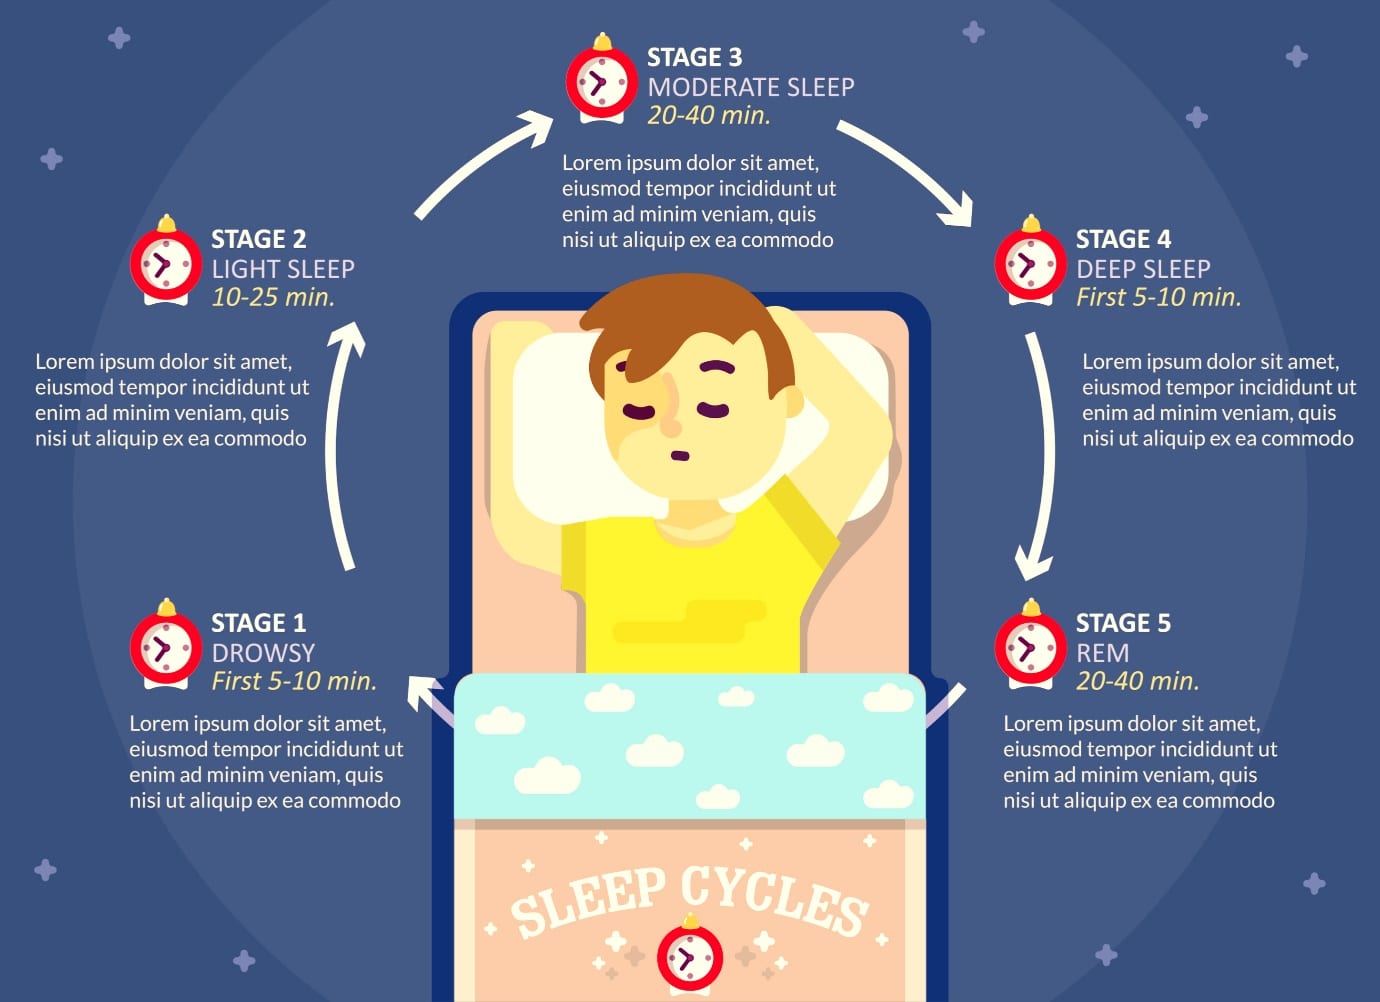 Sleep Cycles and the Stages of Sleep, Defined